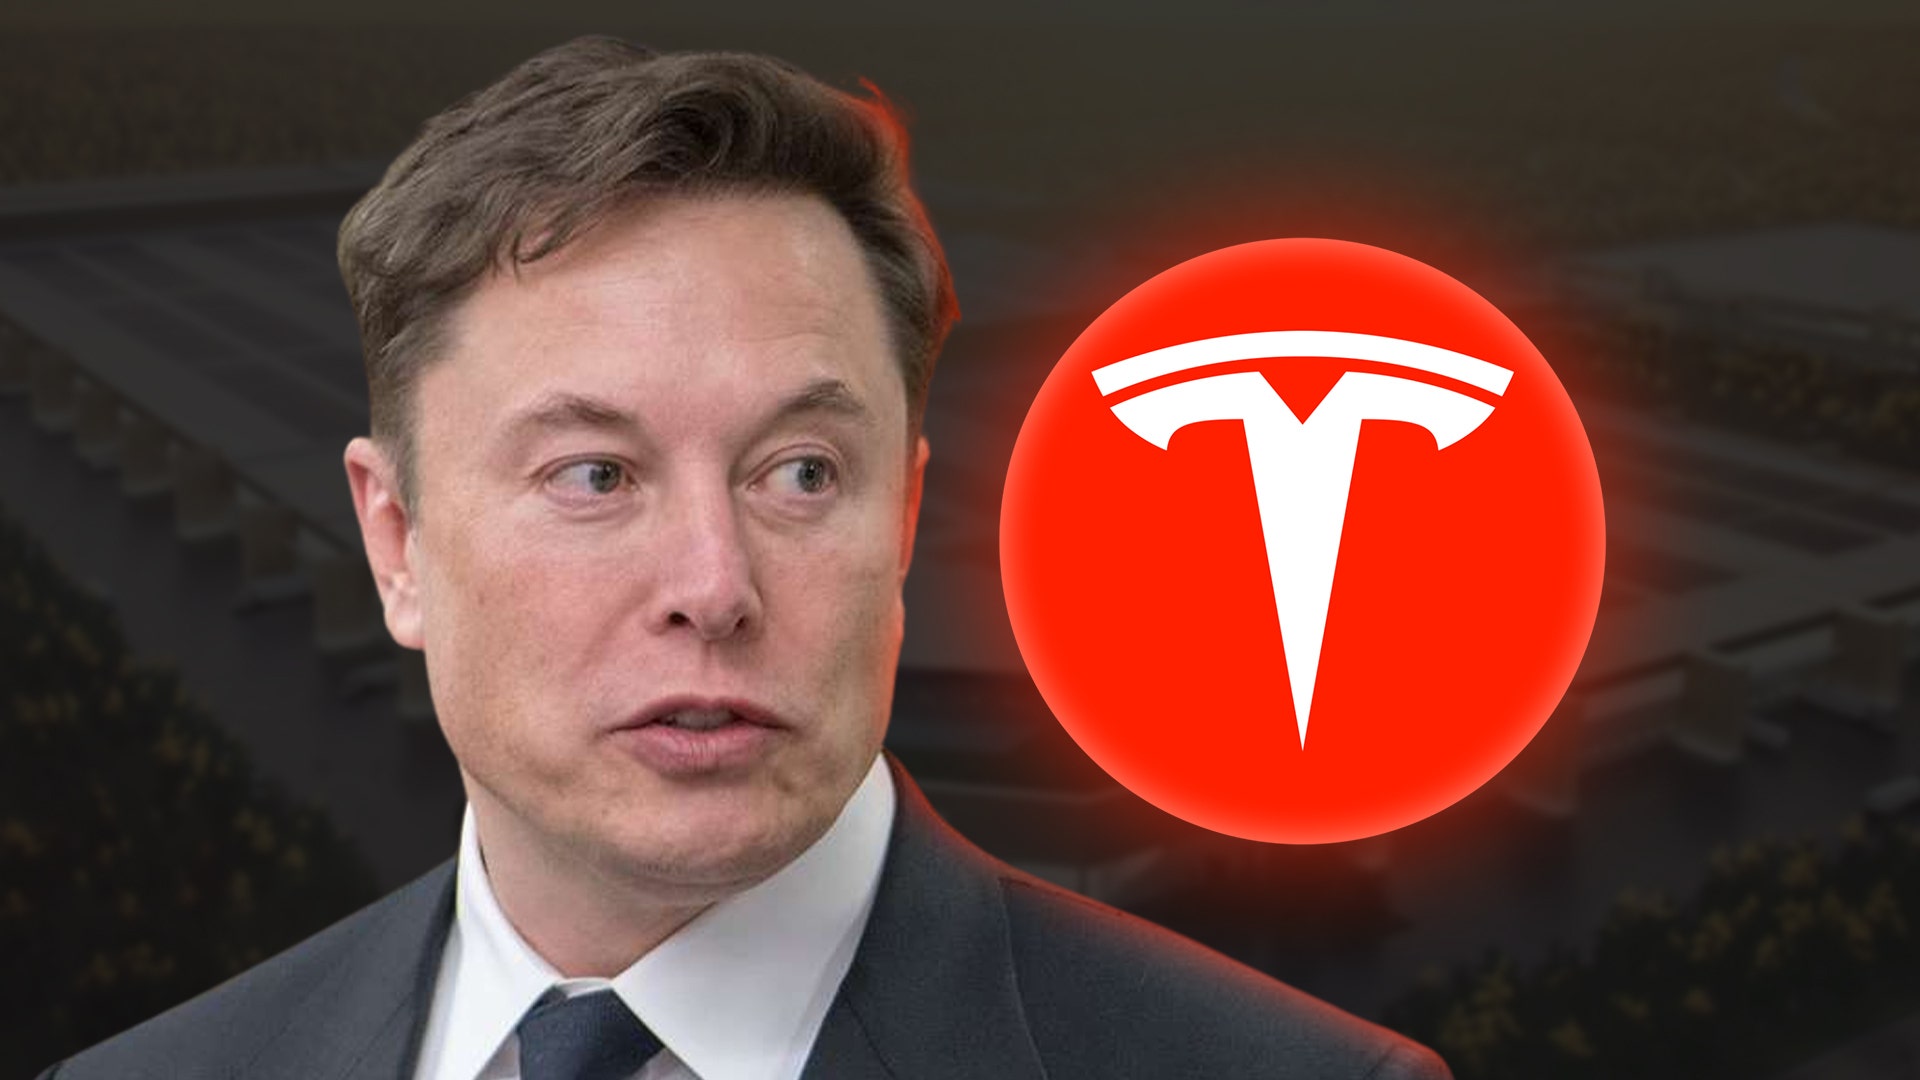 Elon Musk Asked A Top Tesla Executive To Forfeit Unvested Equity Awards And He Promptly Quit: Report